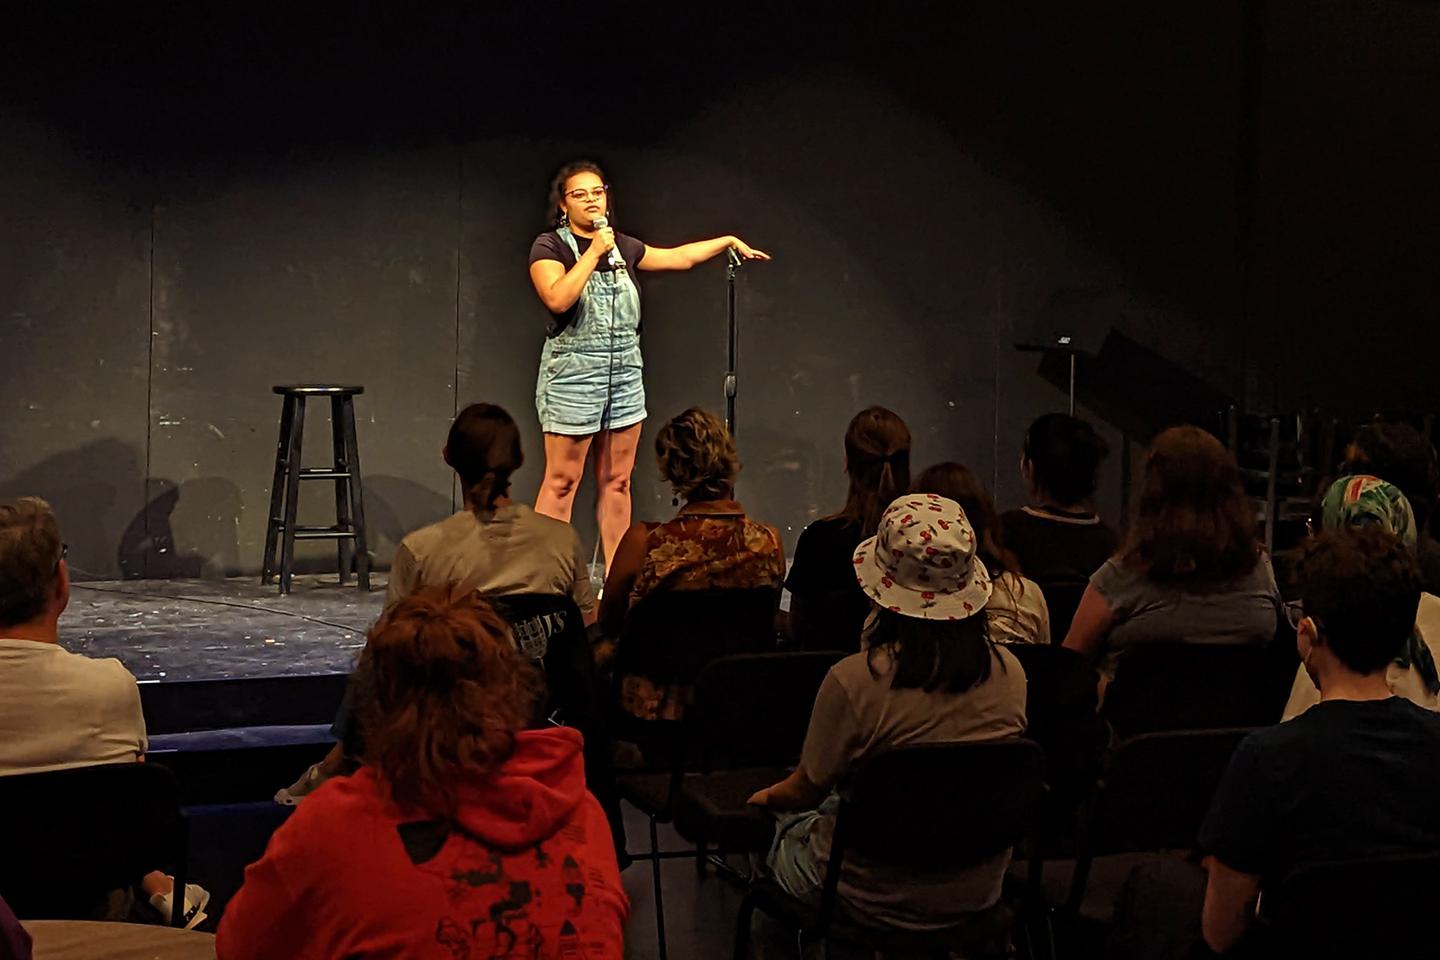 A student stands in the spotlight on stage, performing stand-up comedy for an audience.